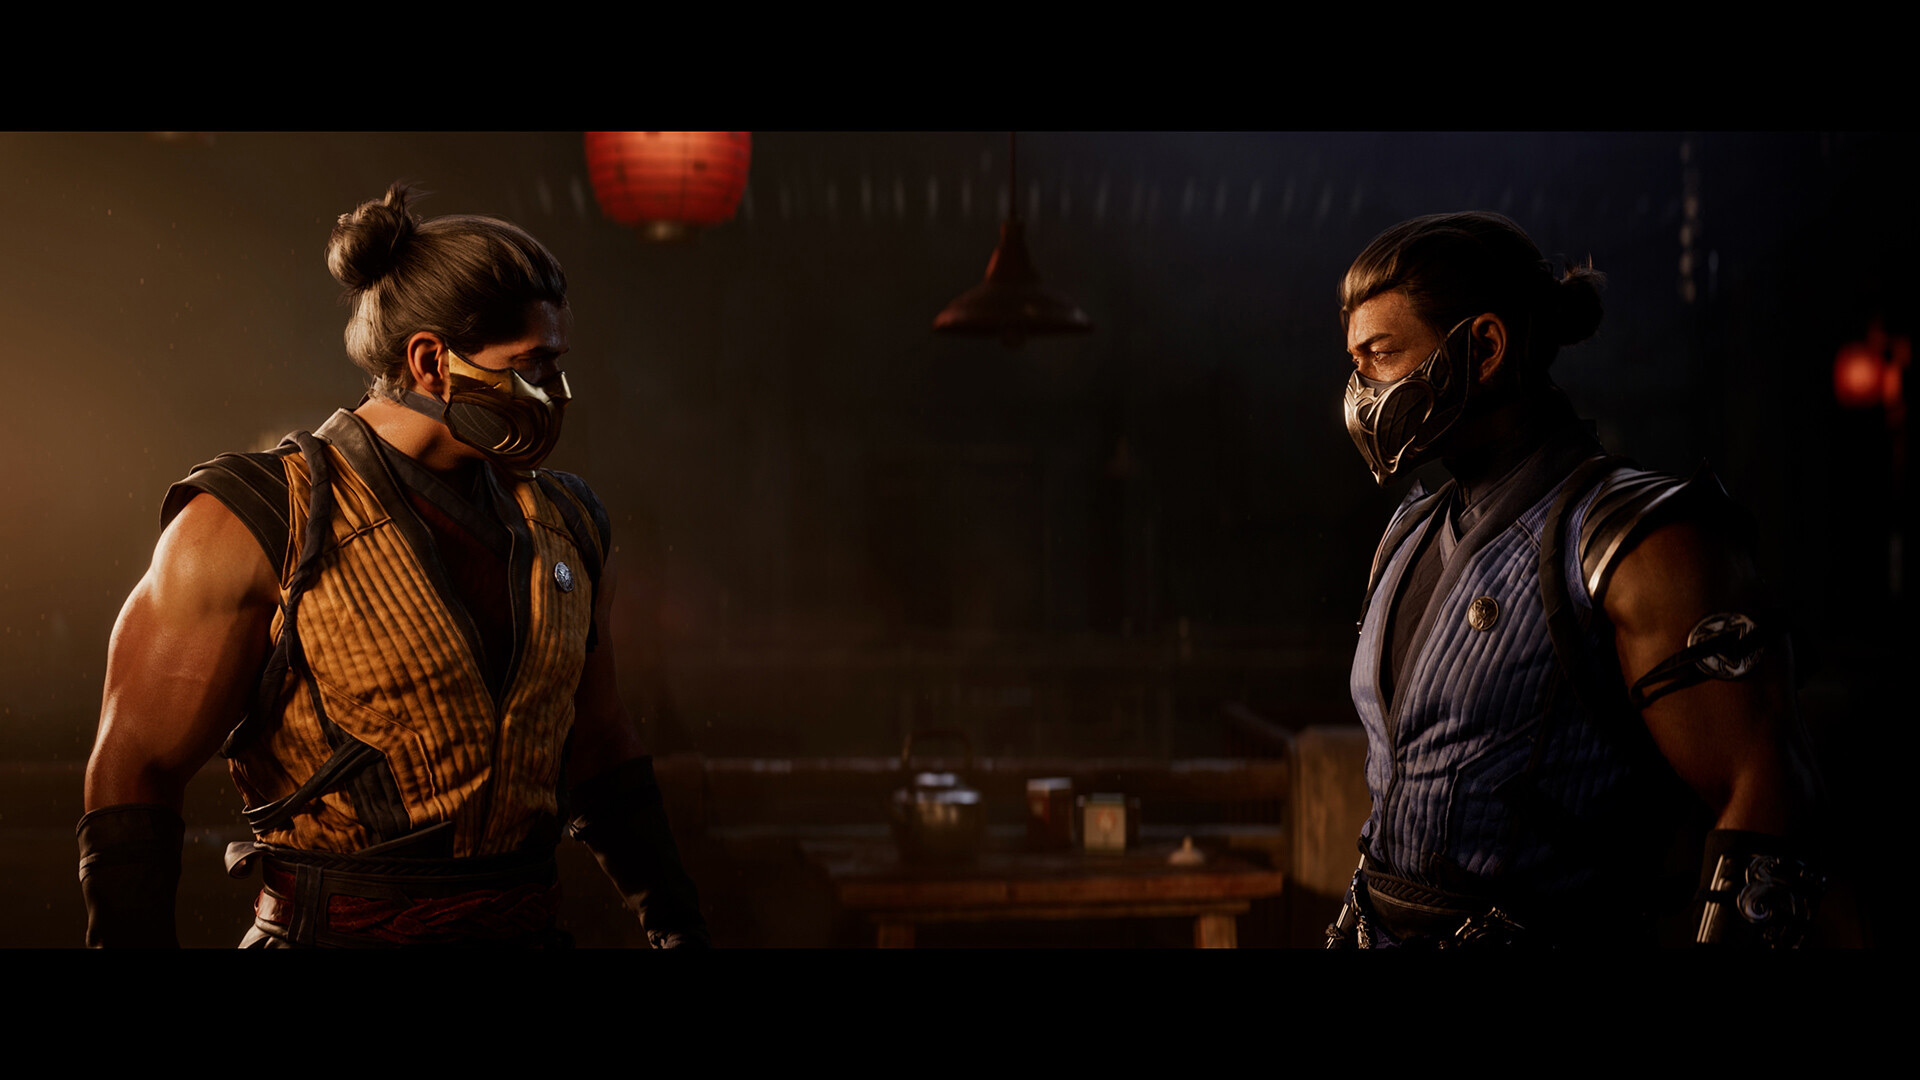 Mortal Kombat 1 PC requirements have been revealed